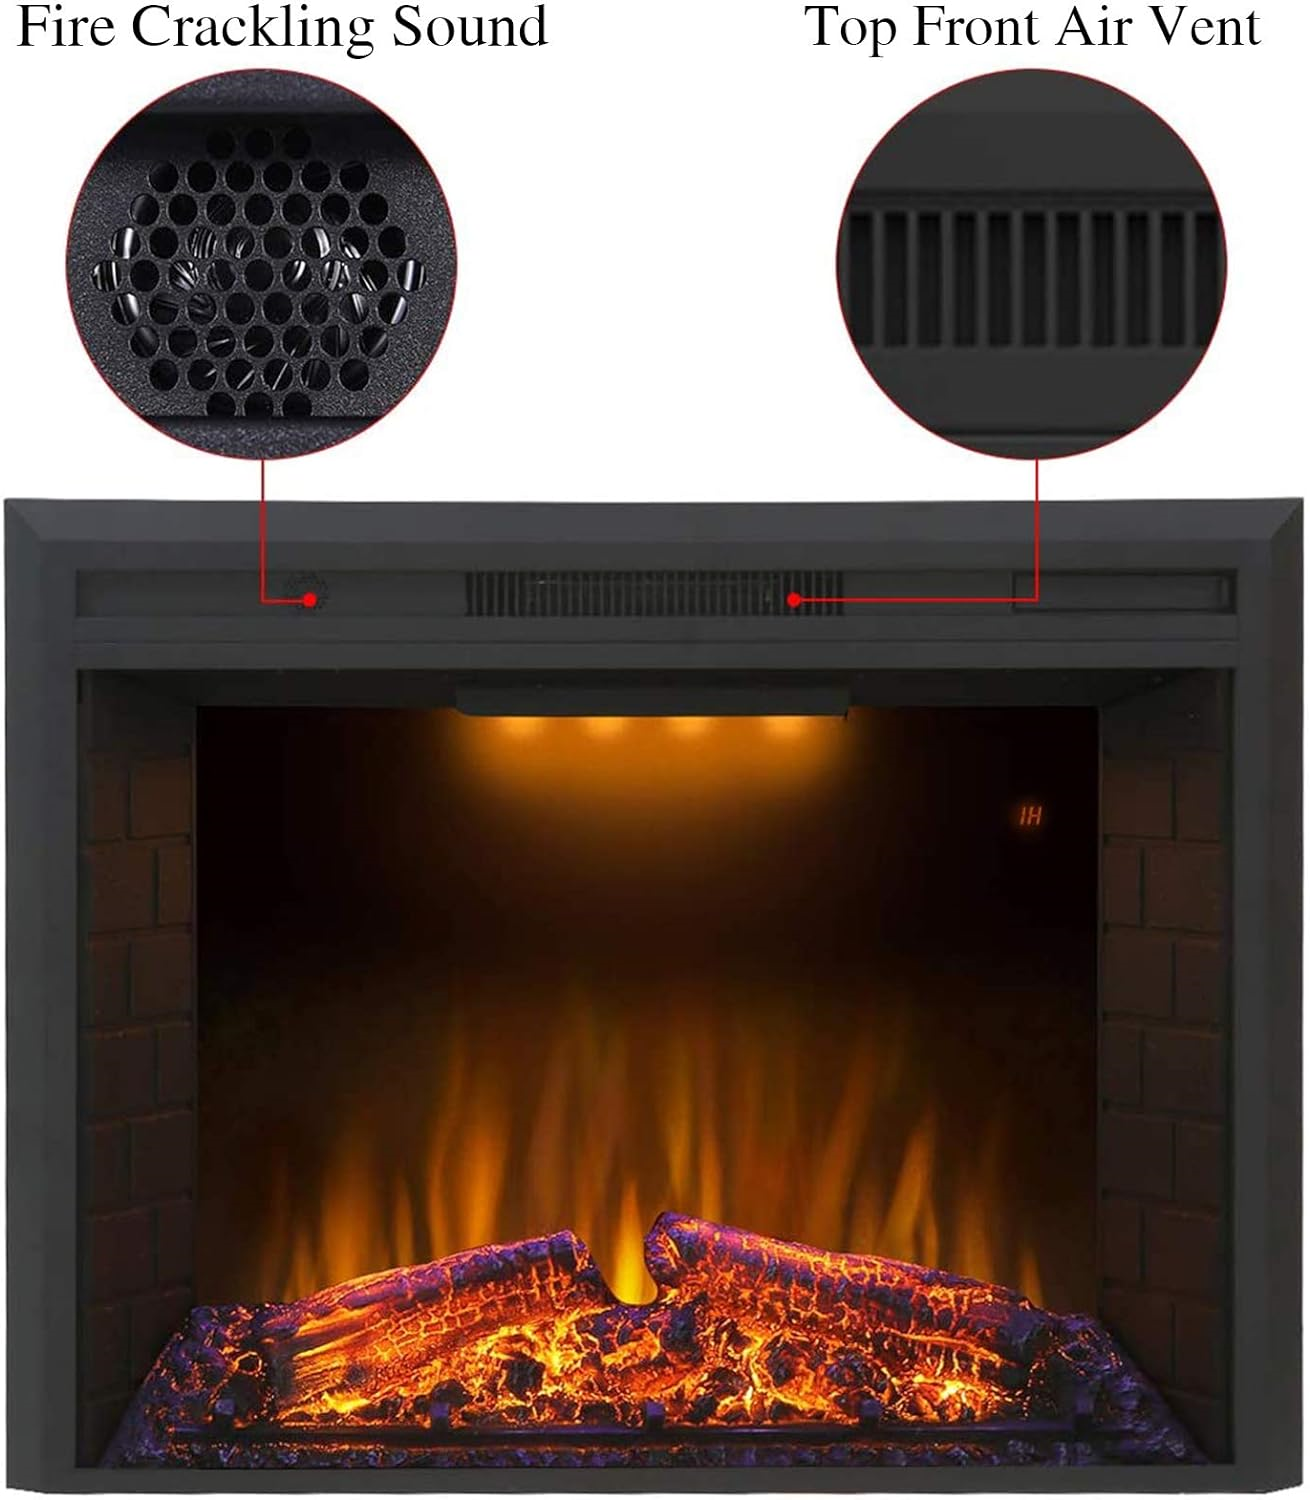 Valuxhome EF28T Electric Fireplace 30" Insert 750/1500W with Overheating Protection and Fire Crackling Sound Remote Black New